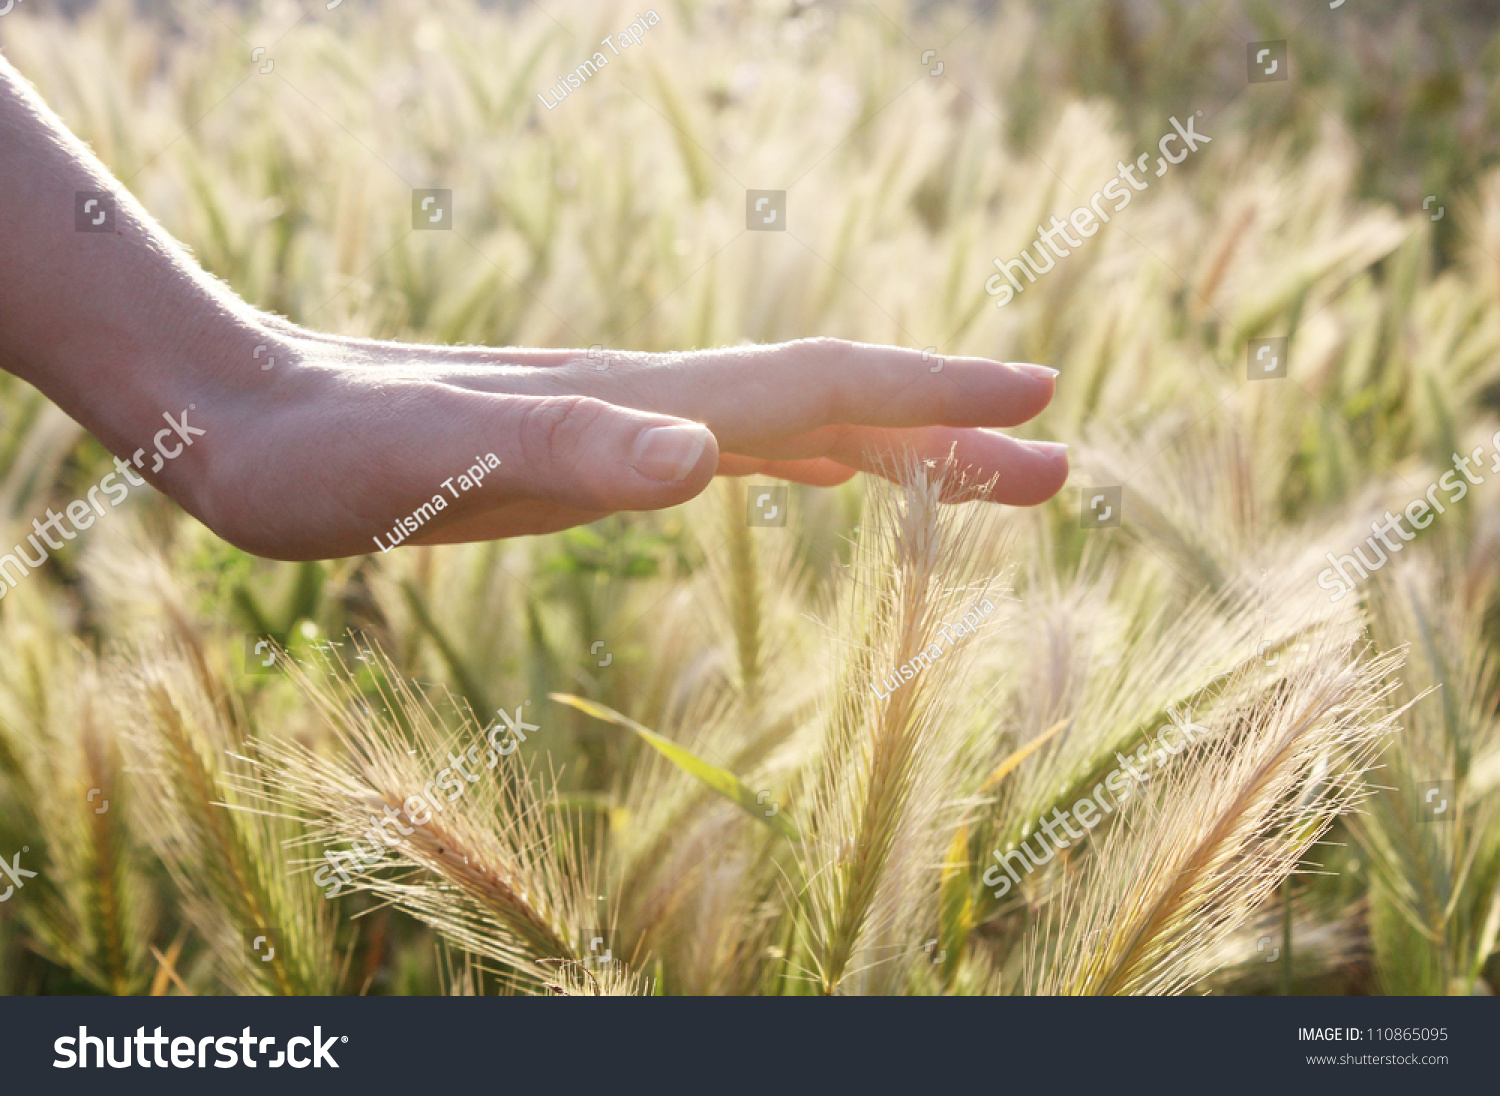 Hand caressing some ears of wheat. #110865095